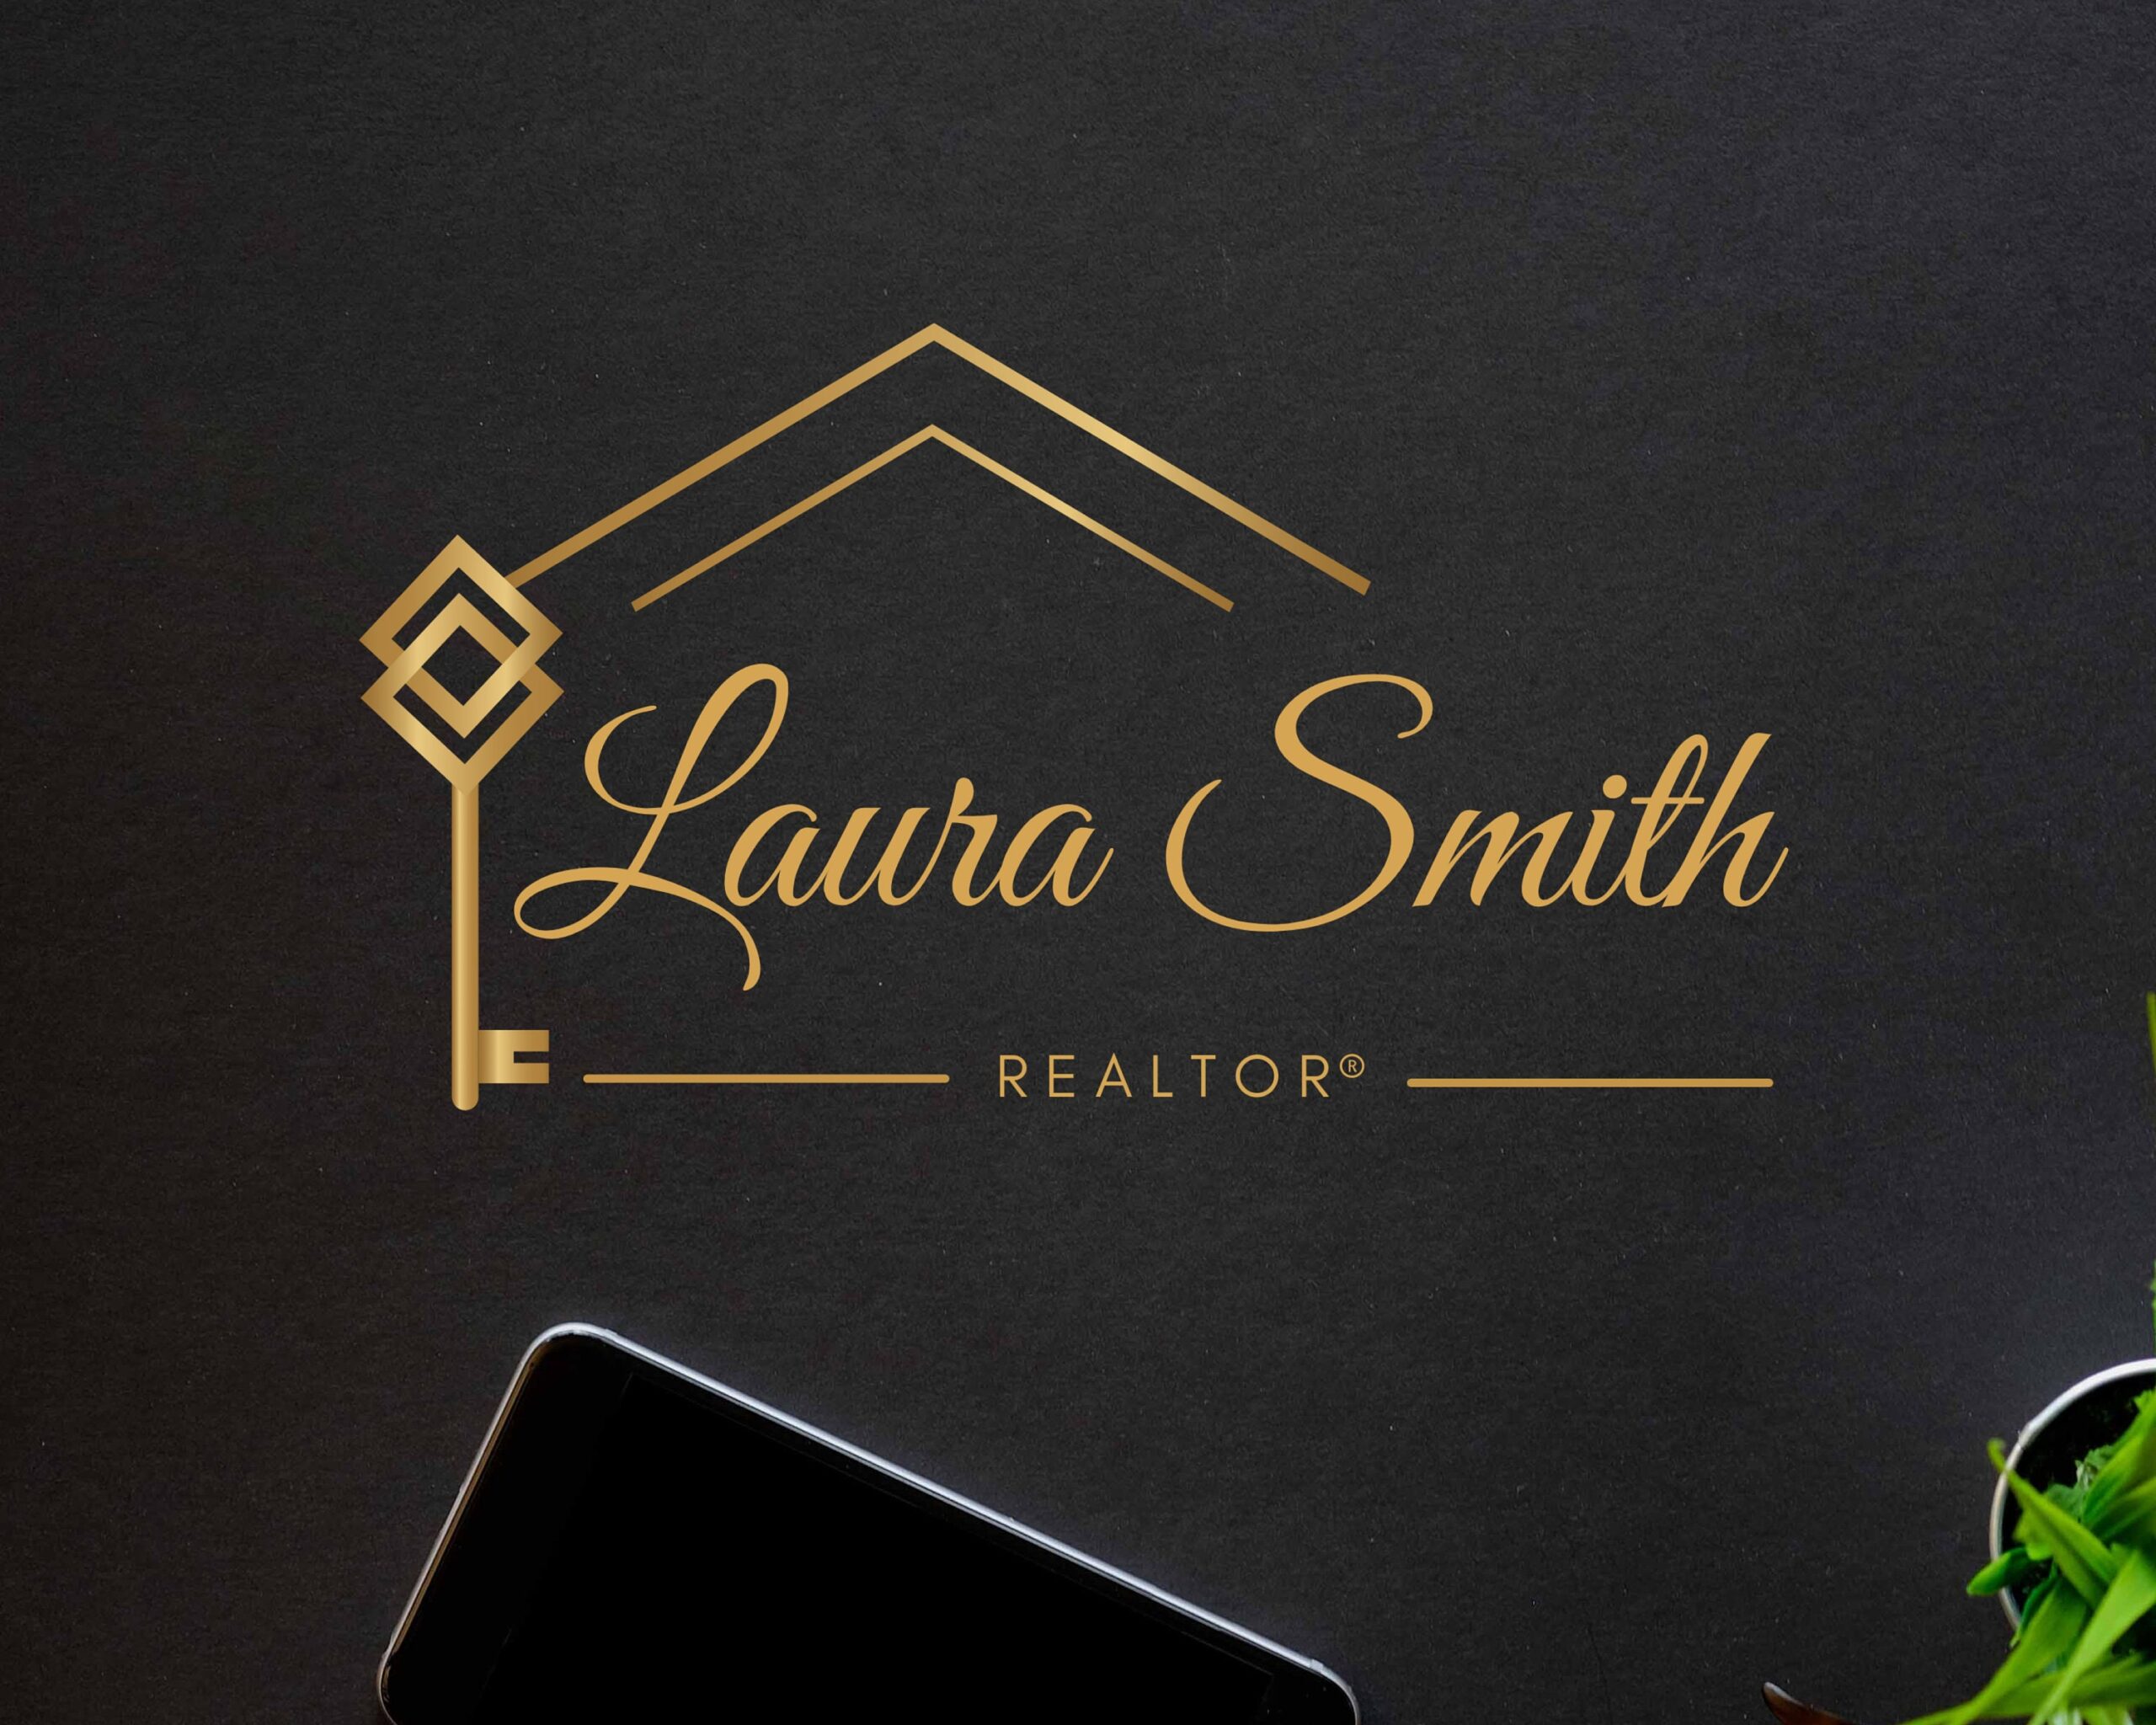 PREMADE HOUSE LOGO for Real Estate Agents, Realtor Logo, Submark and Watermarks All Included, Original Design - High-Quality Branding